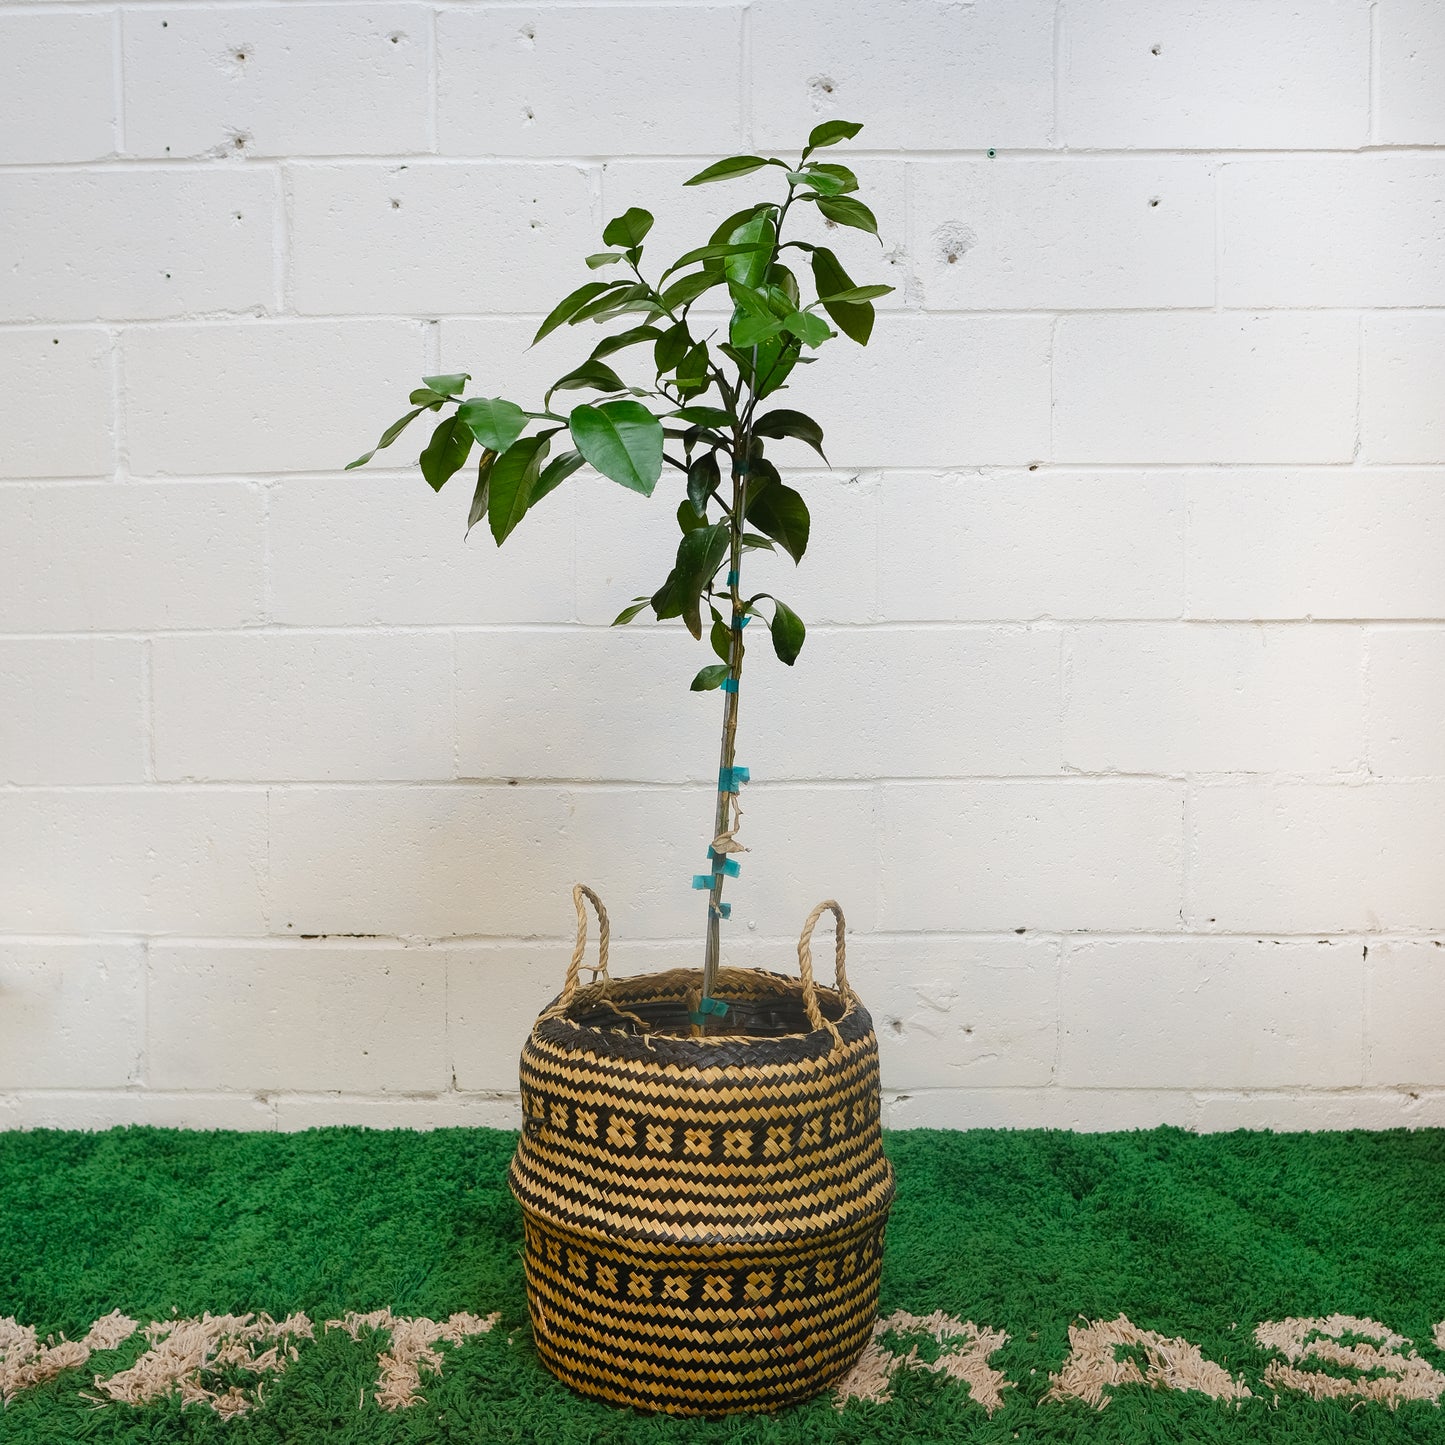 Grapefruit Tree (Citrus × paradisi) in a 12 inch pot. Indoor plant for sale by Promise Supply for delivery and pickup in Toronto